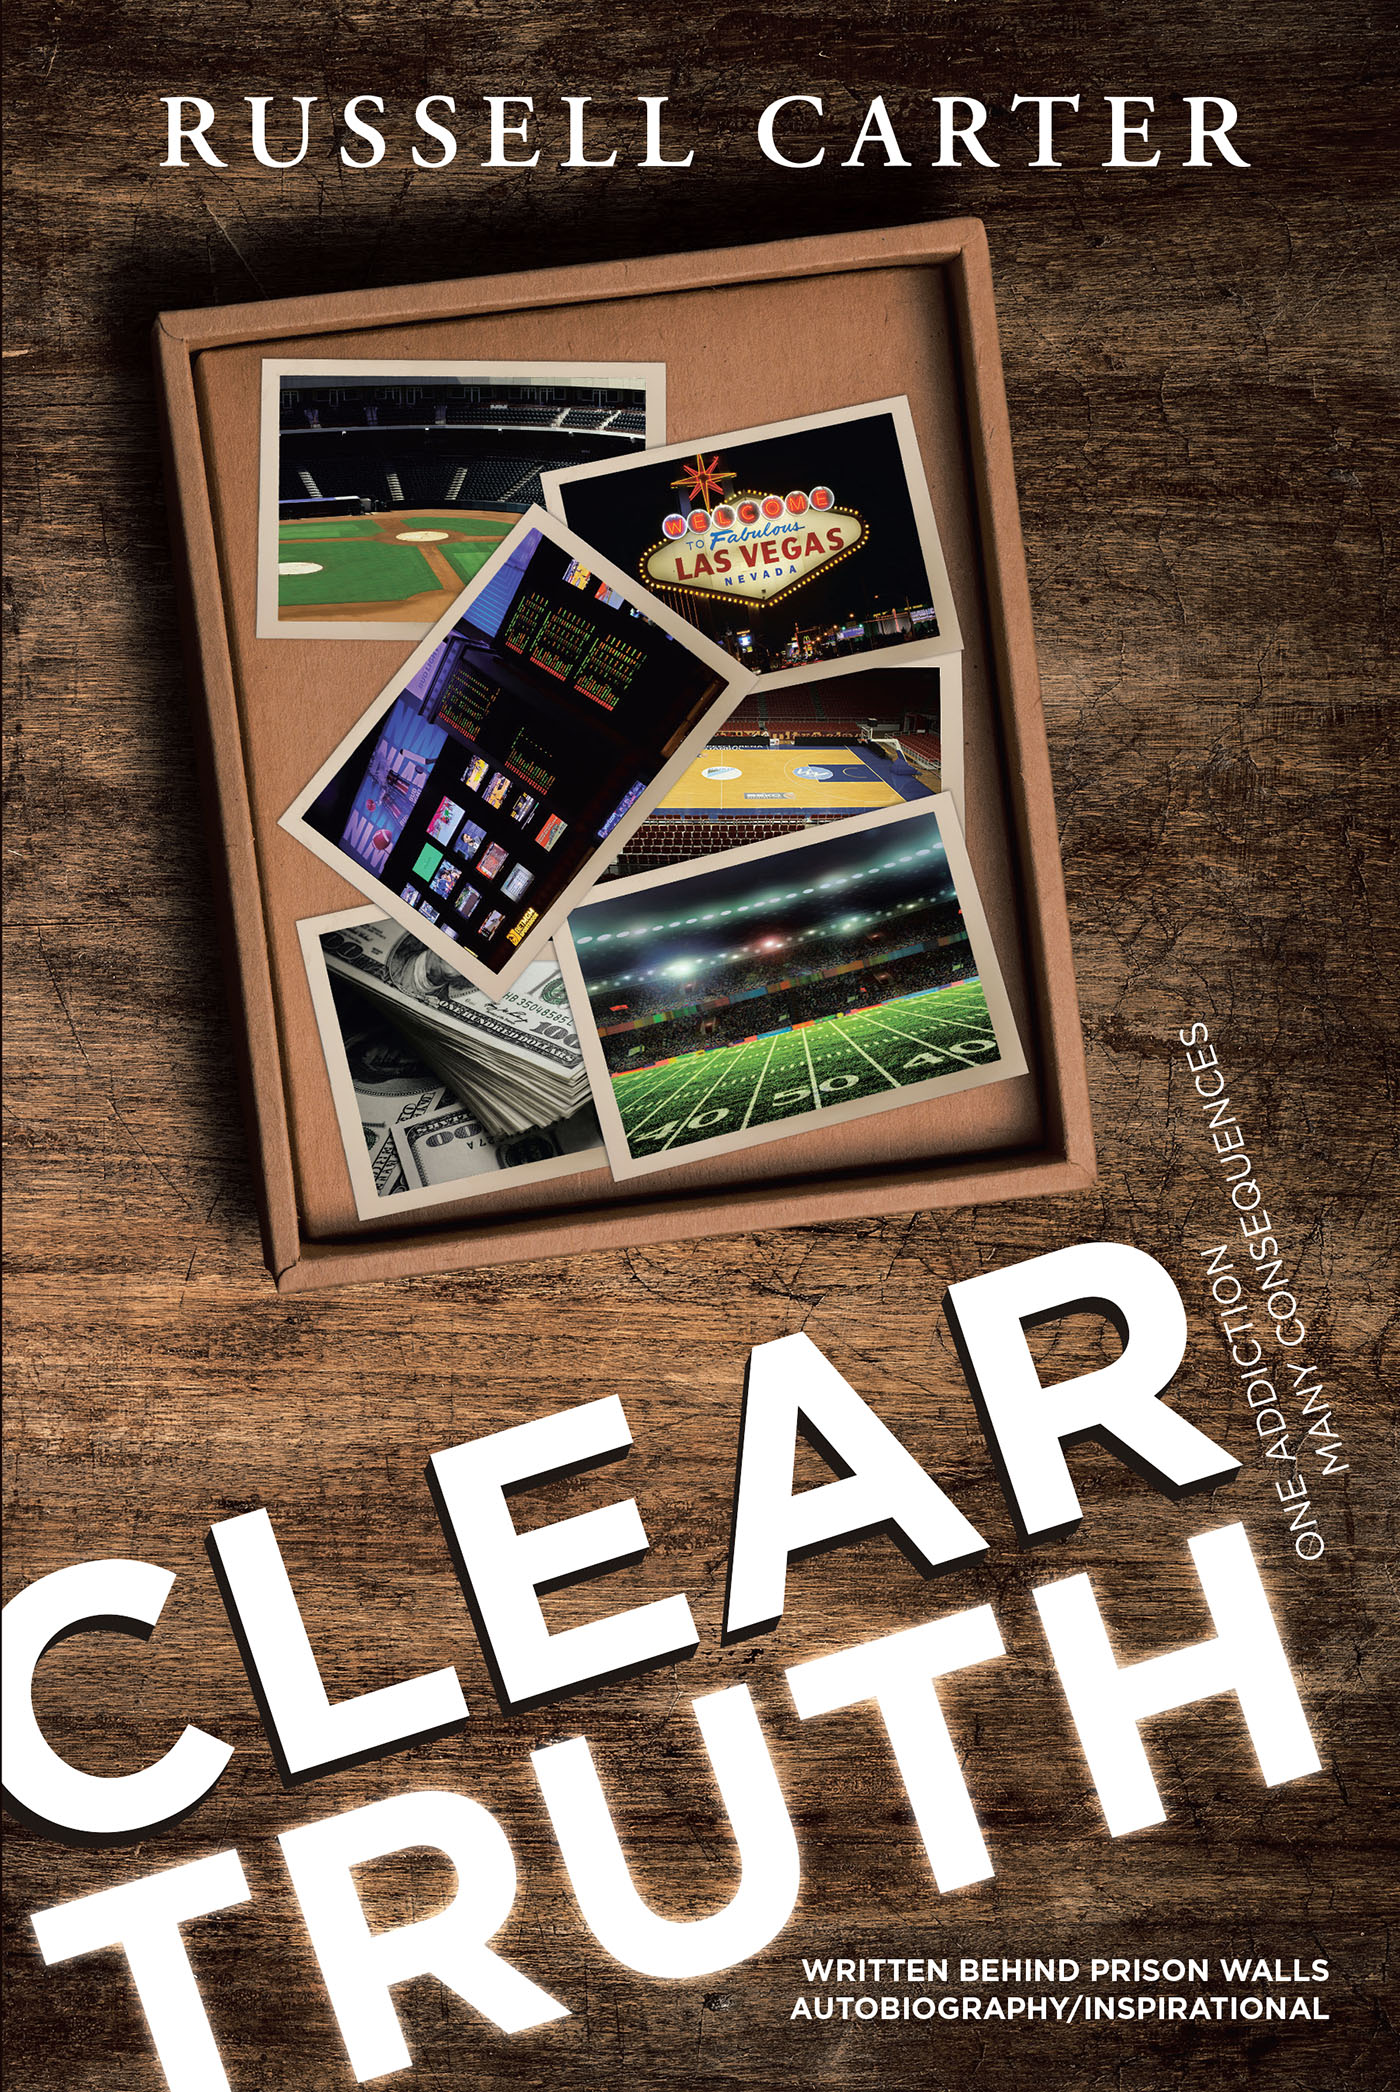 Author Russell Carter’s Book, "Clear Truth," is a Riveting Memoir of His Formative Years & His Torturous Descent Into a Gambling Addiction That Changed His Life Forever